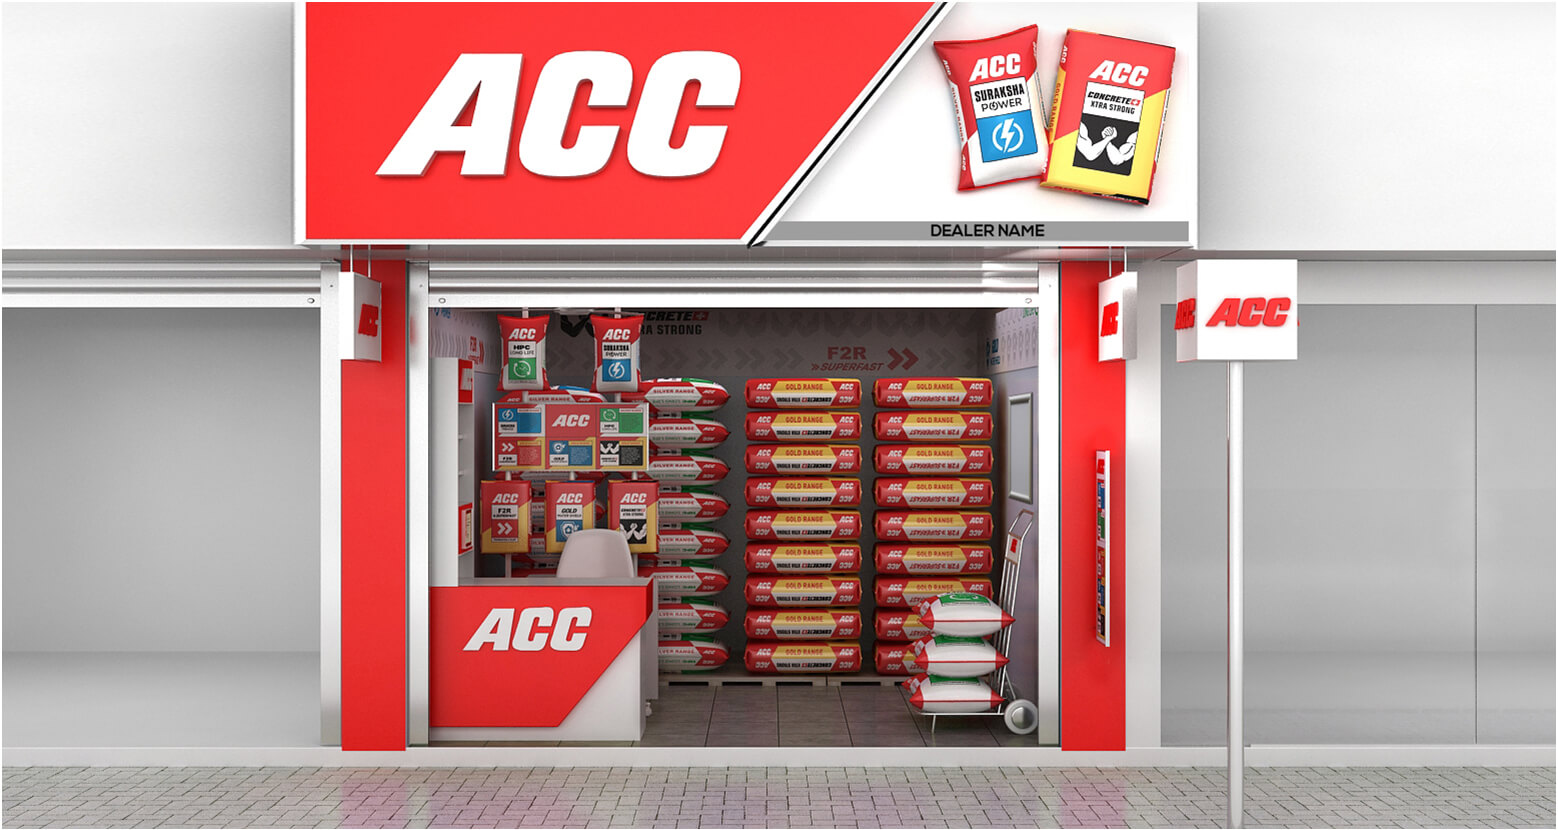 ACC’s Another Robust Quarter With YoY 77% Growth In EBITDA